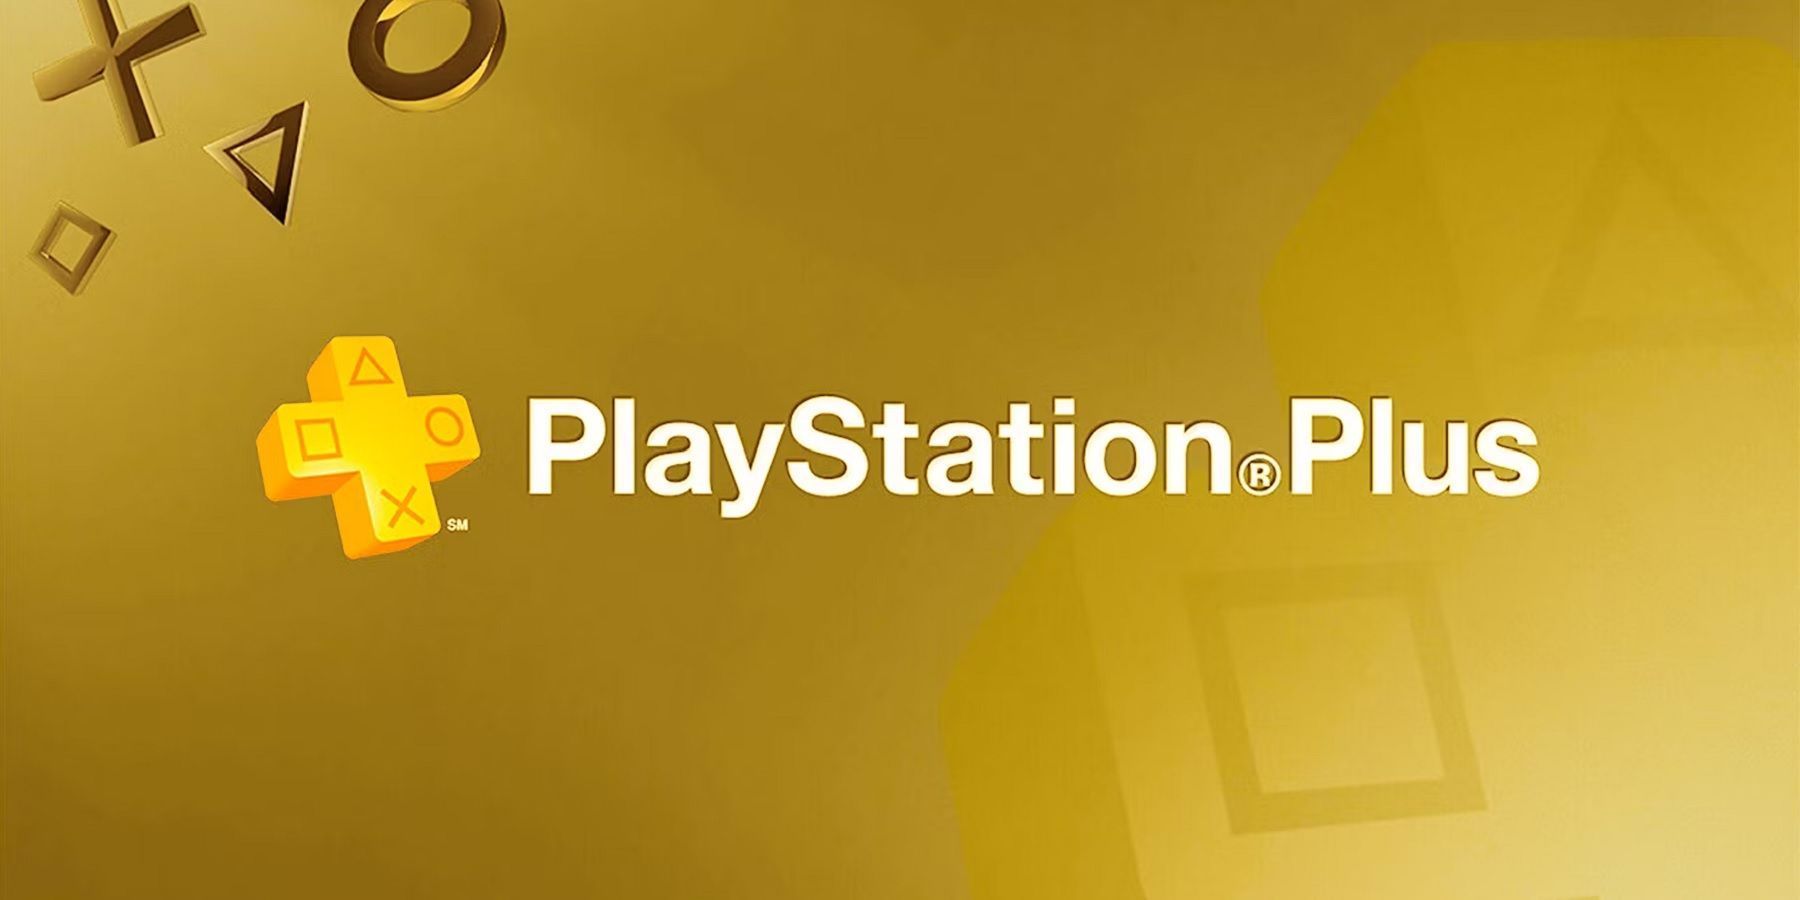 Here are the 23 games set to hit PS Plus and Premium in May